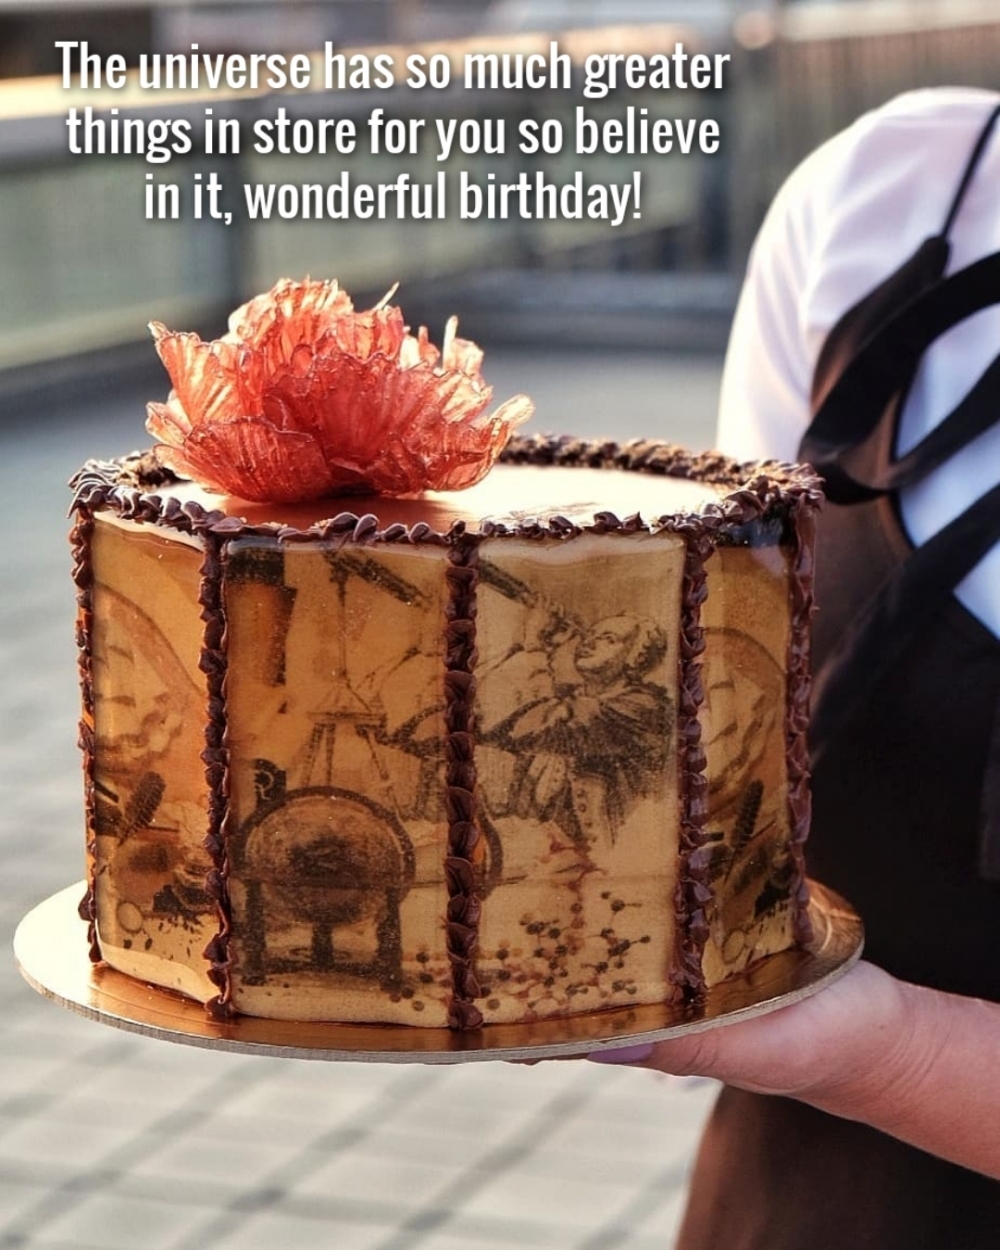 Picture: Have a wonderful birthday!